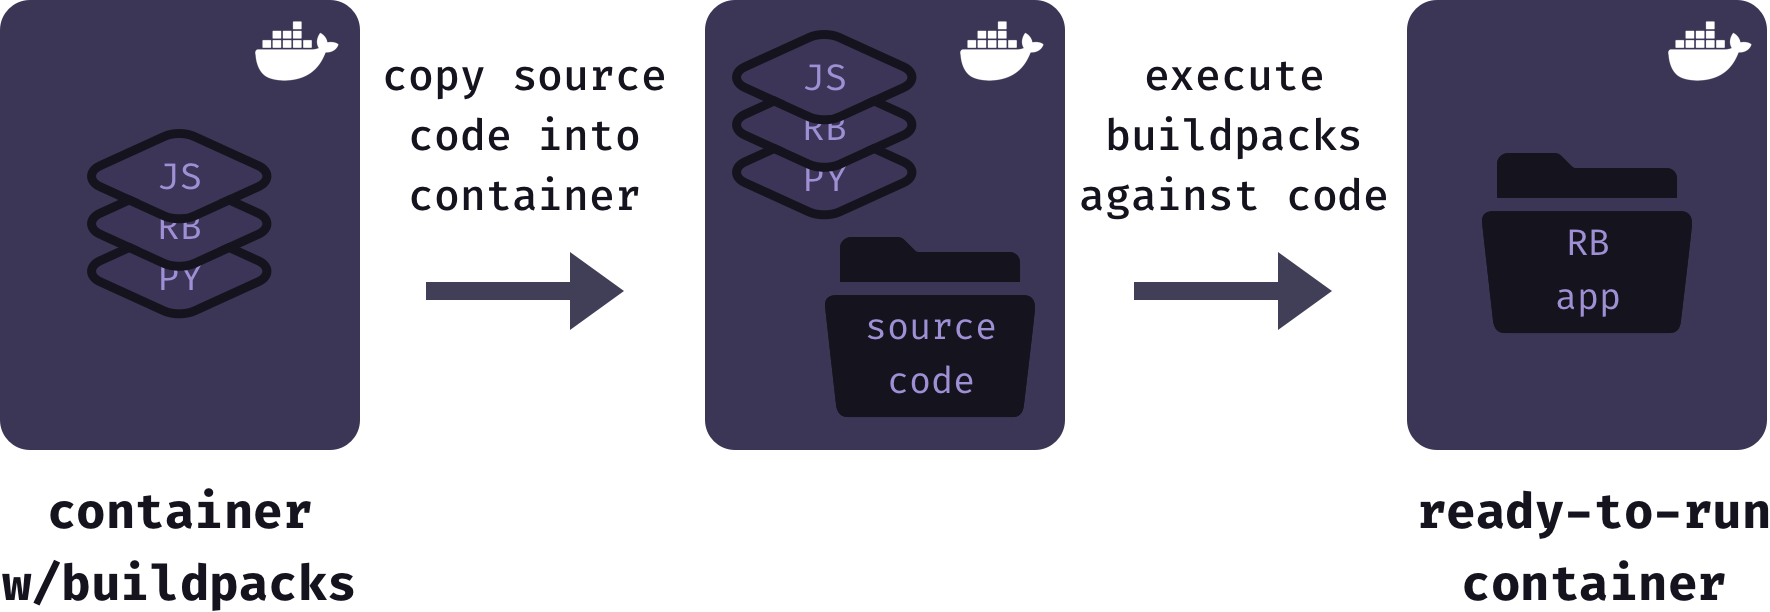 Copy code to server and execute buildpacks against them